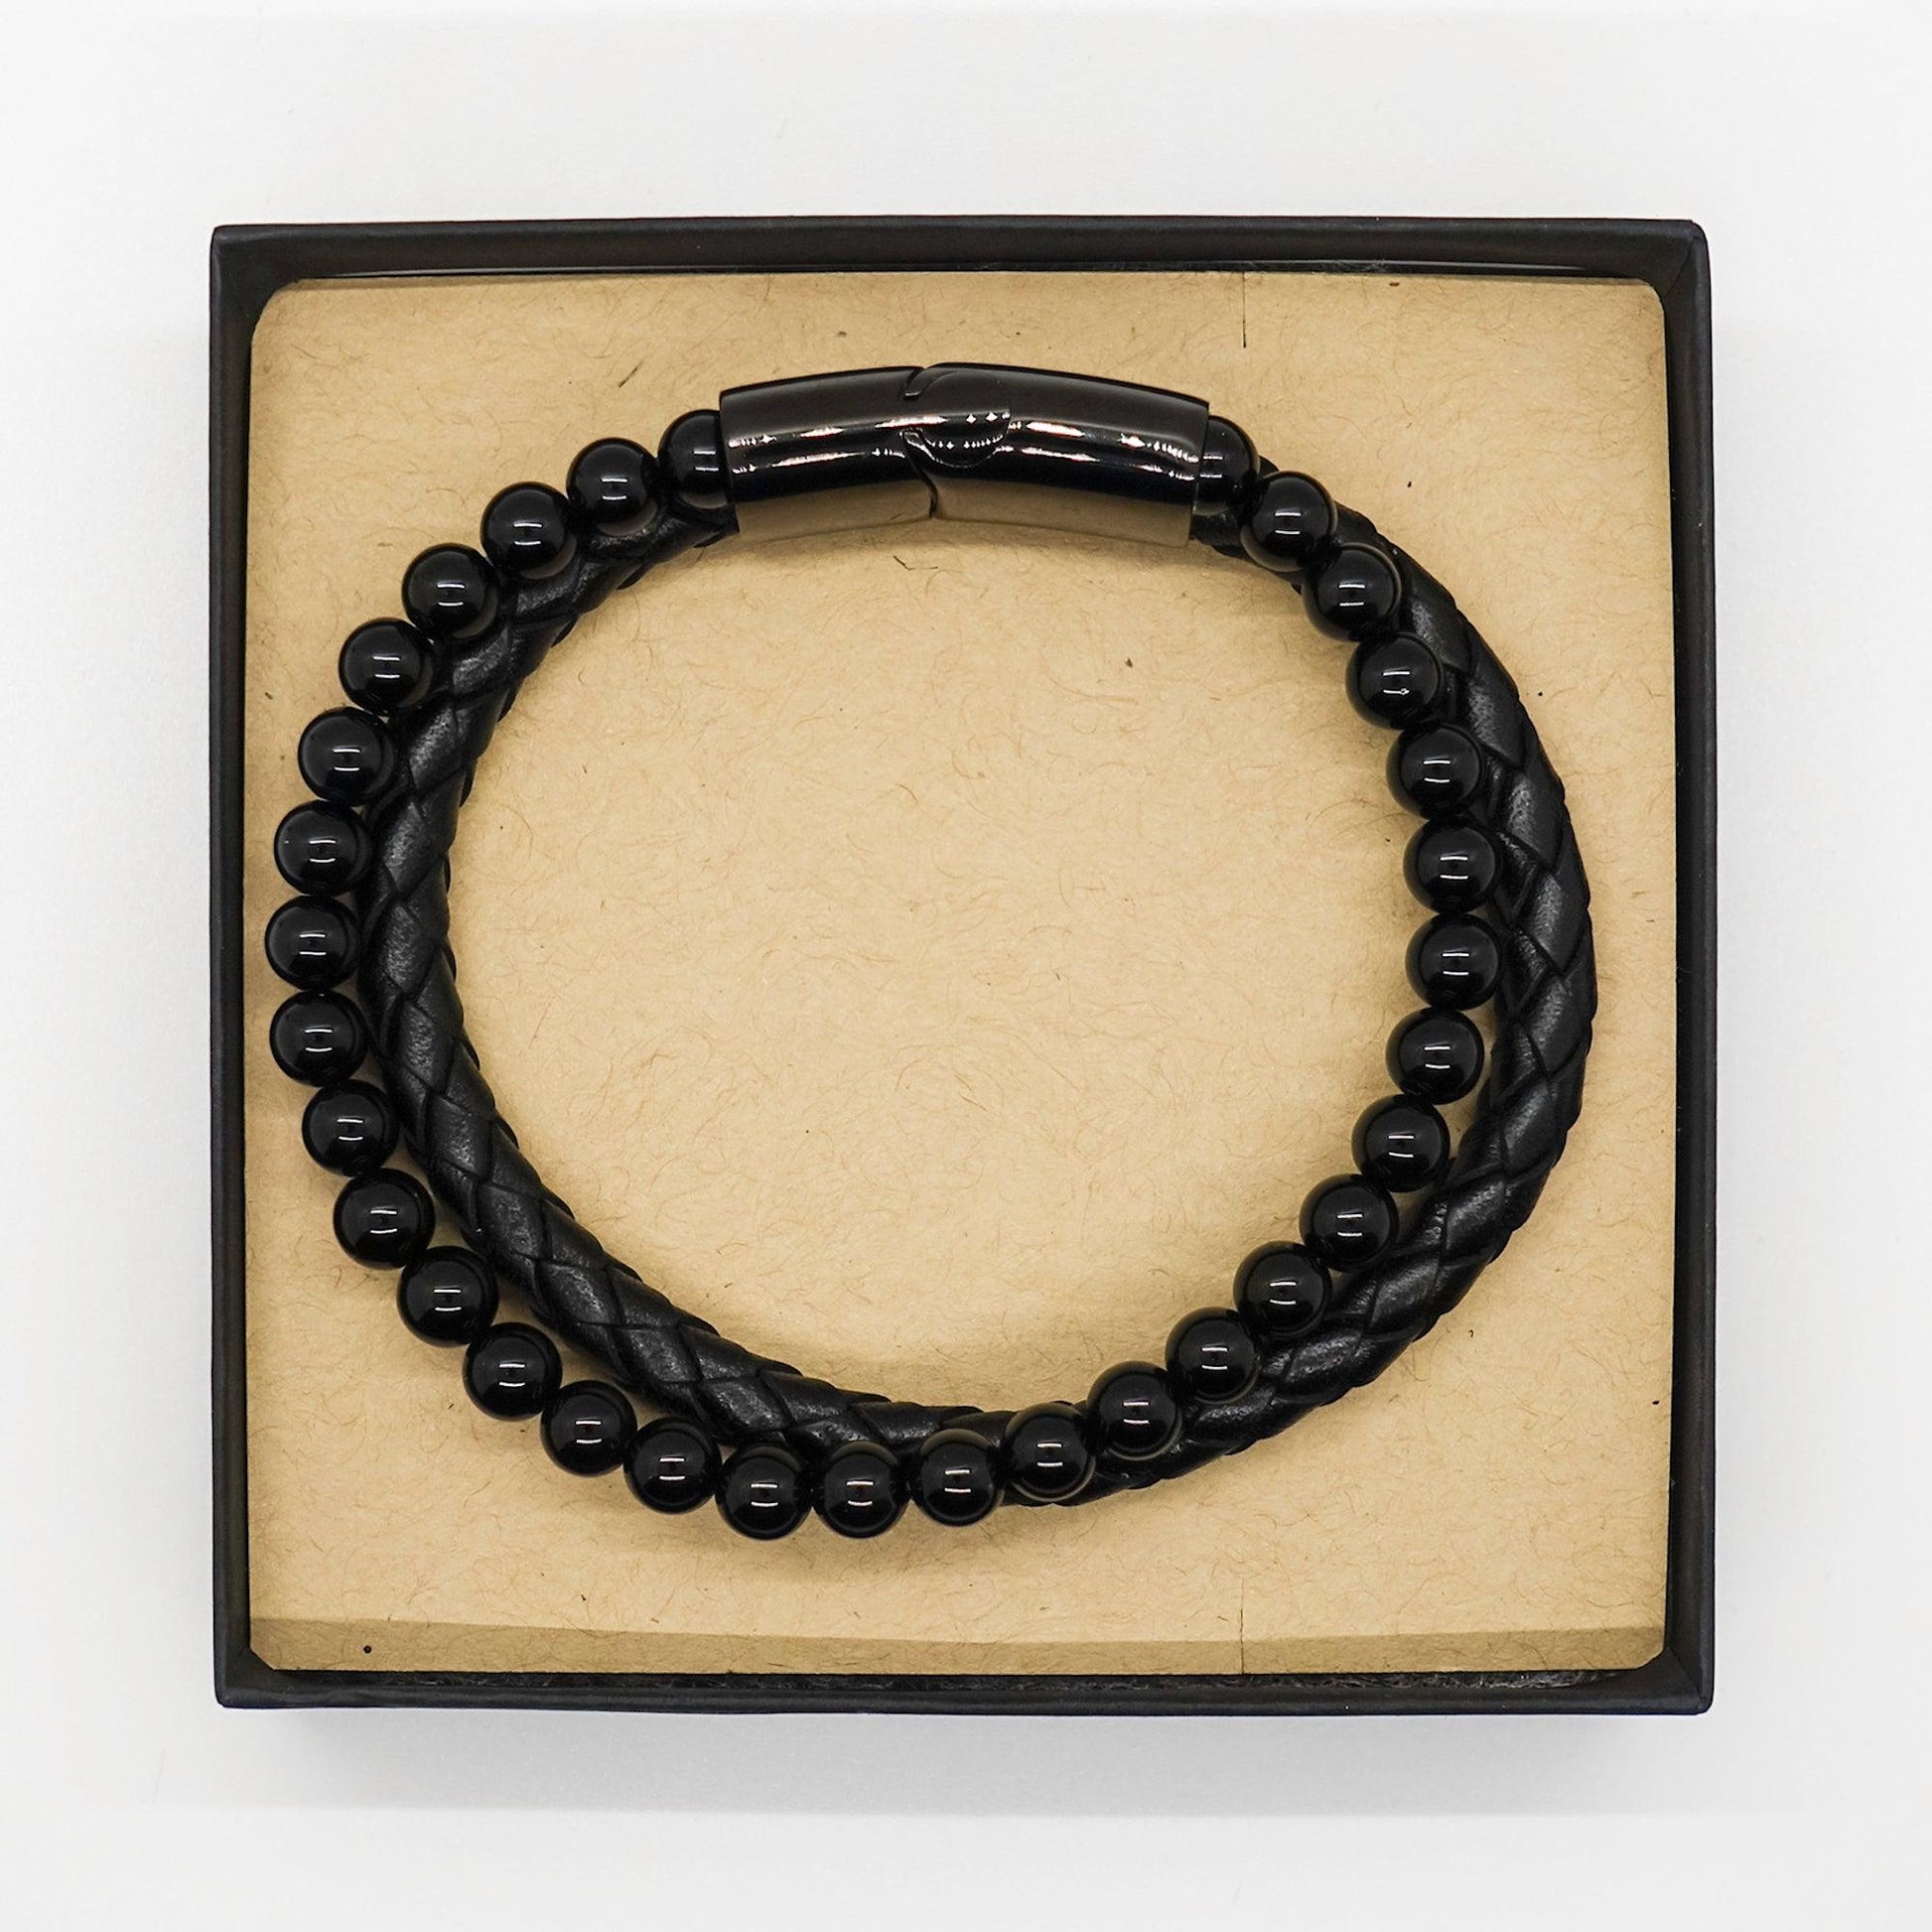 Director Black Braided Leather Stone Bracelet - Thanks for being who you are - Birthday Christmas Jewelry Gifts Coworkers Colleague Boss - Mallard Moon Gift Shop